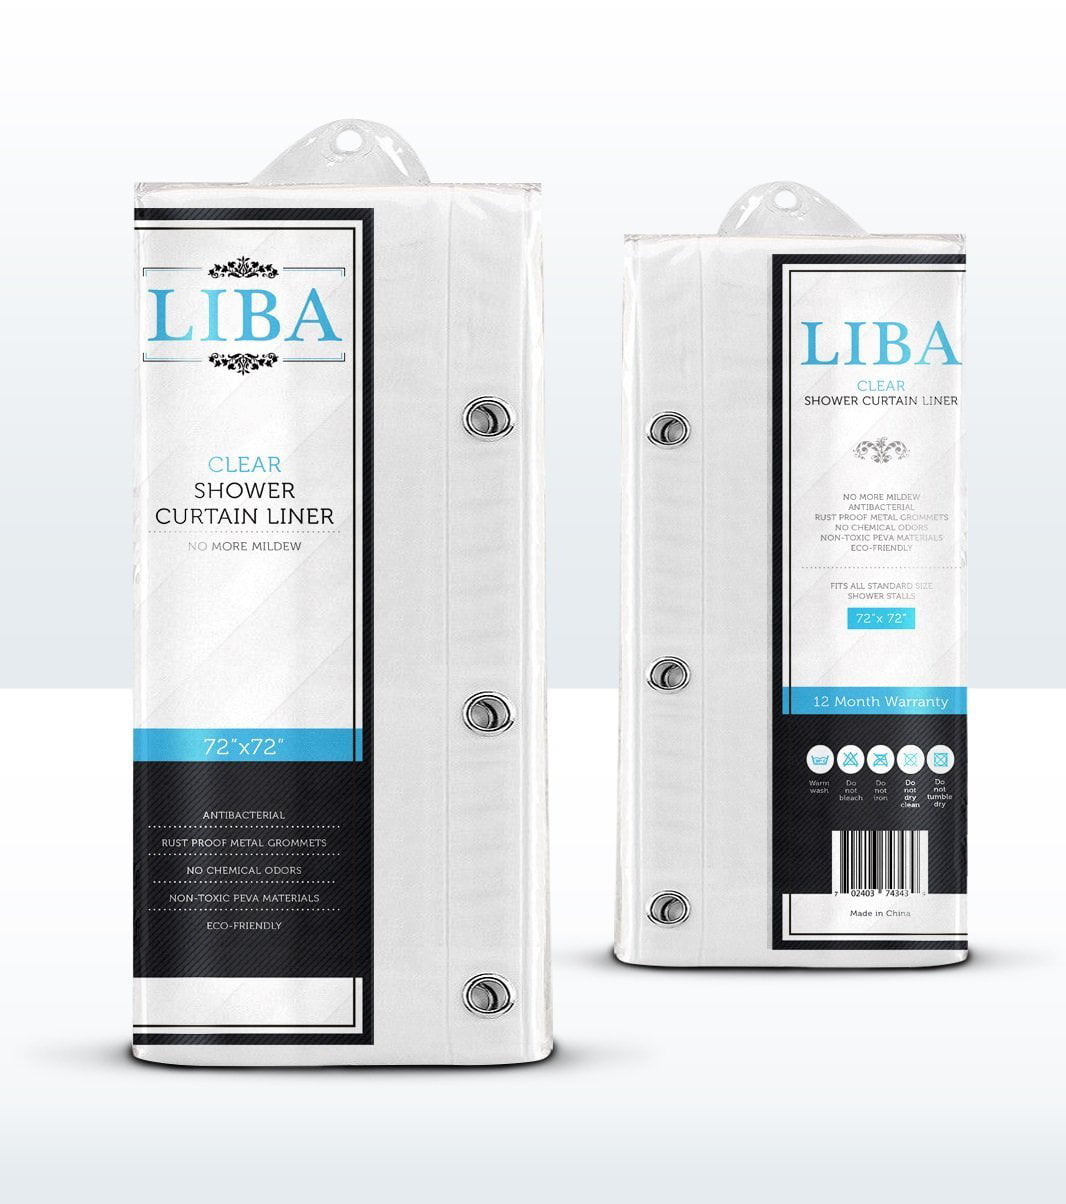 Liba Peva Antimicrobial Pvc Free Shower, Antimicrobial Shower Curtains